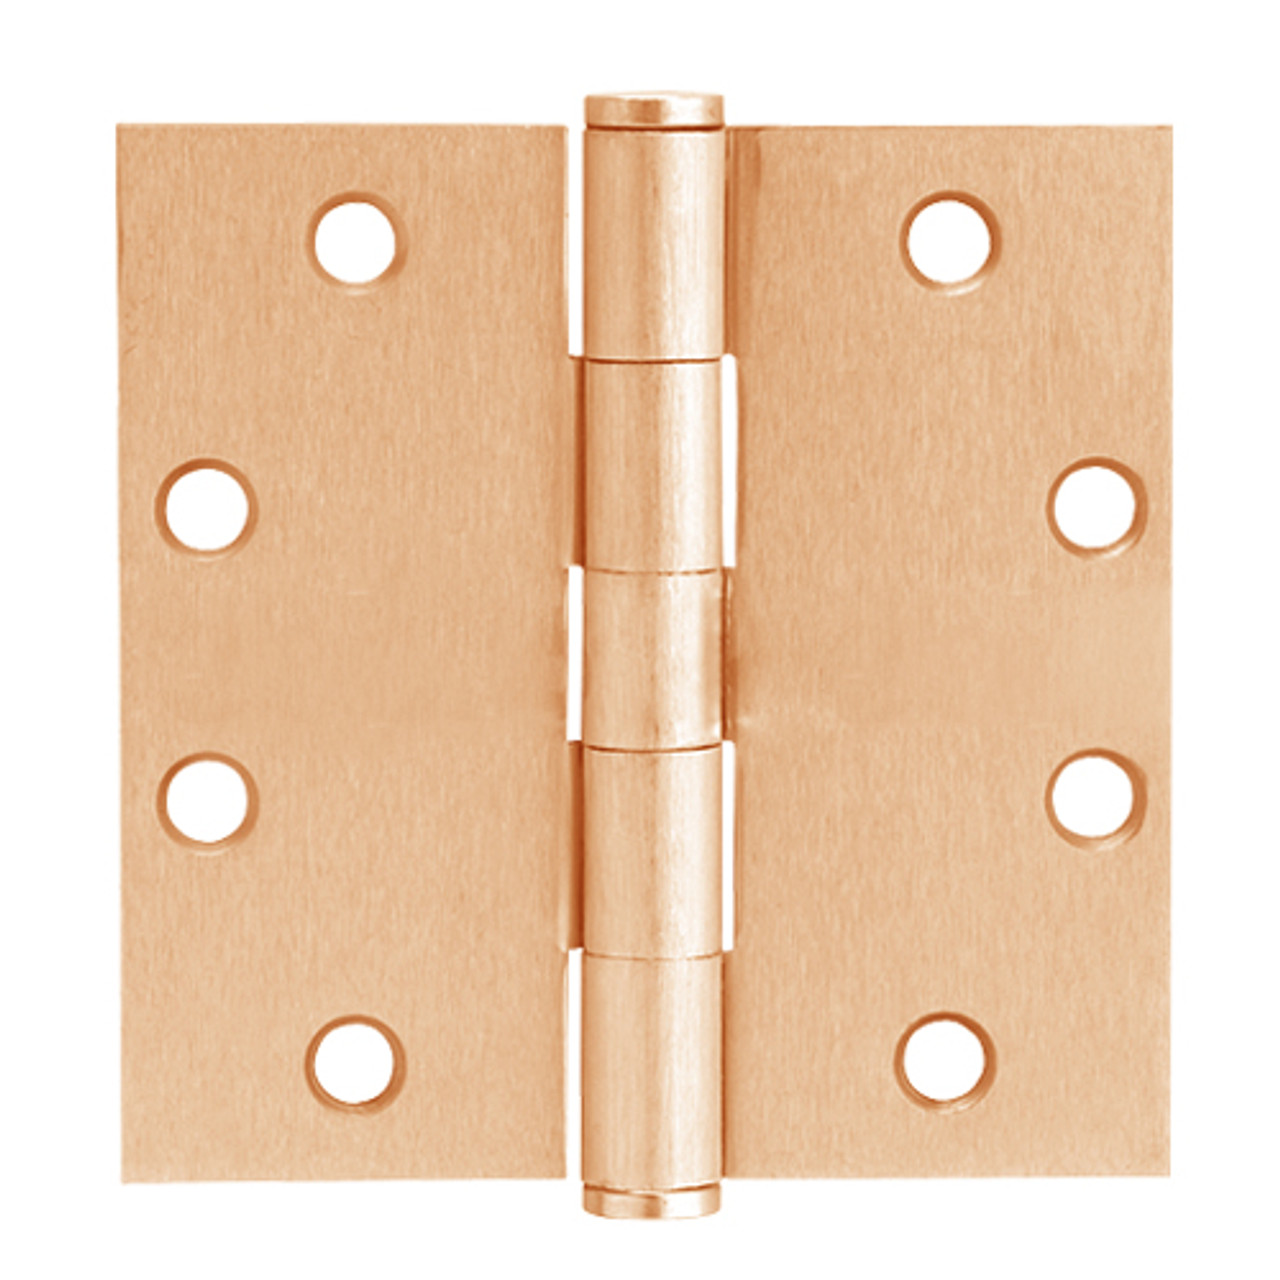 5PB1-5x4-5-639 IVES 5 Knuckle Plain Bearing Full Mortise Hinge in Satin Bronze Plated